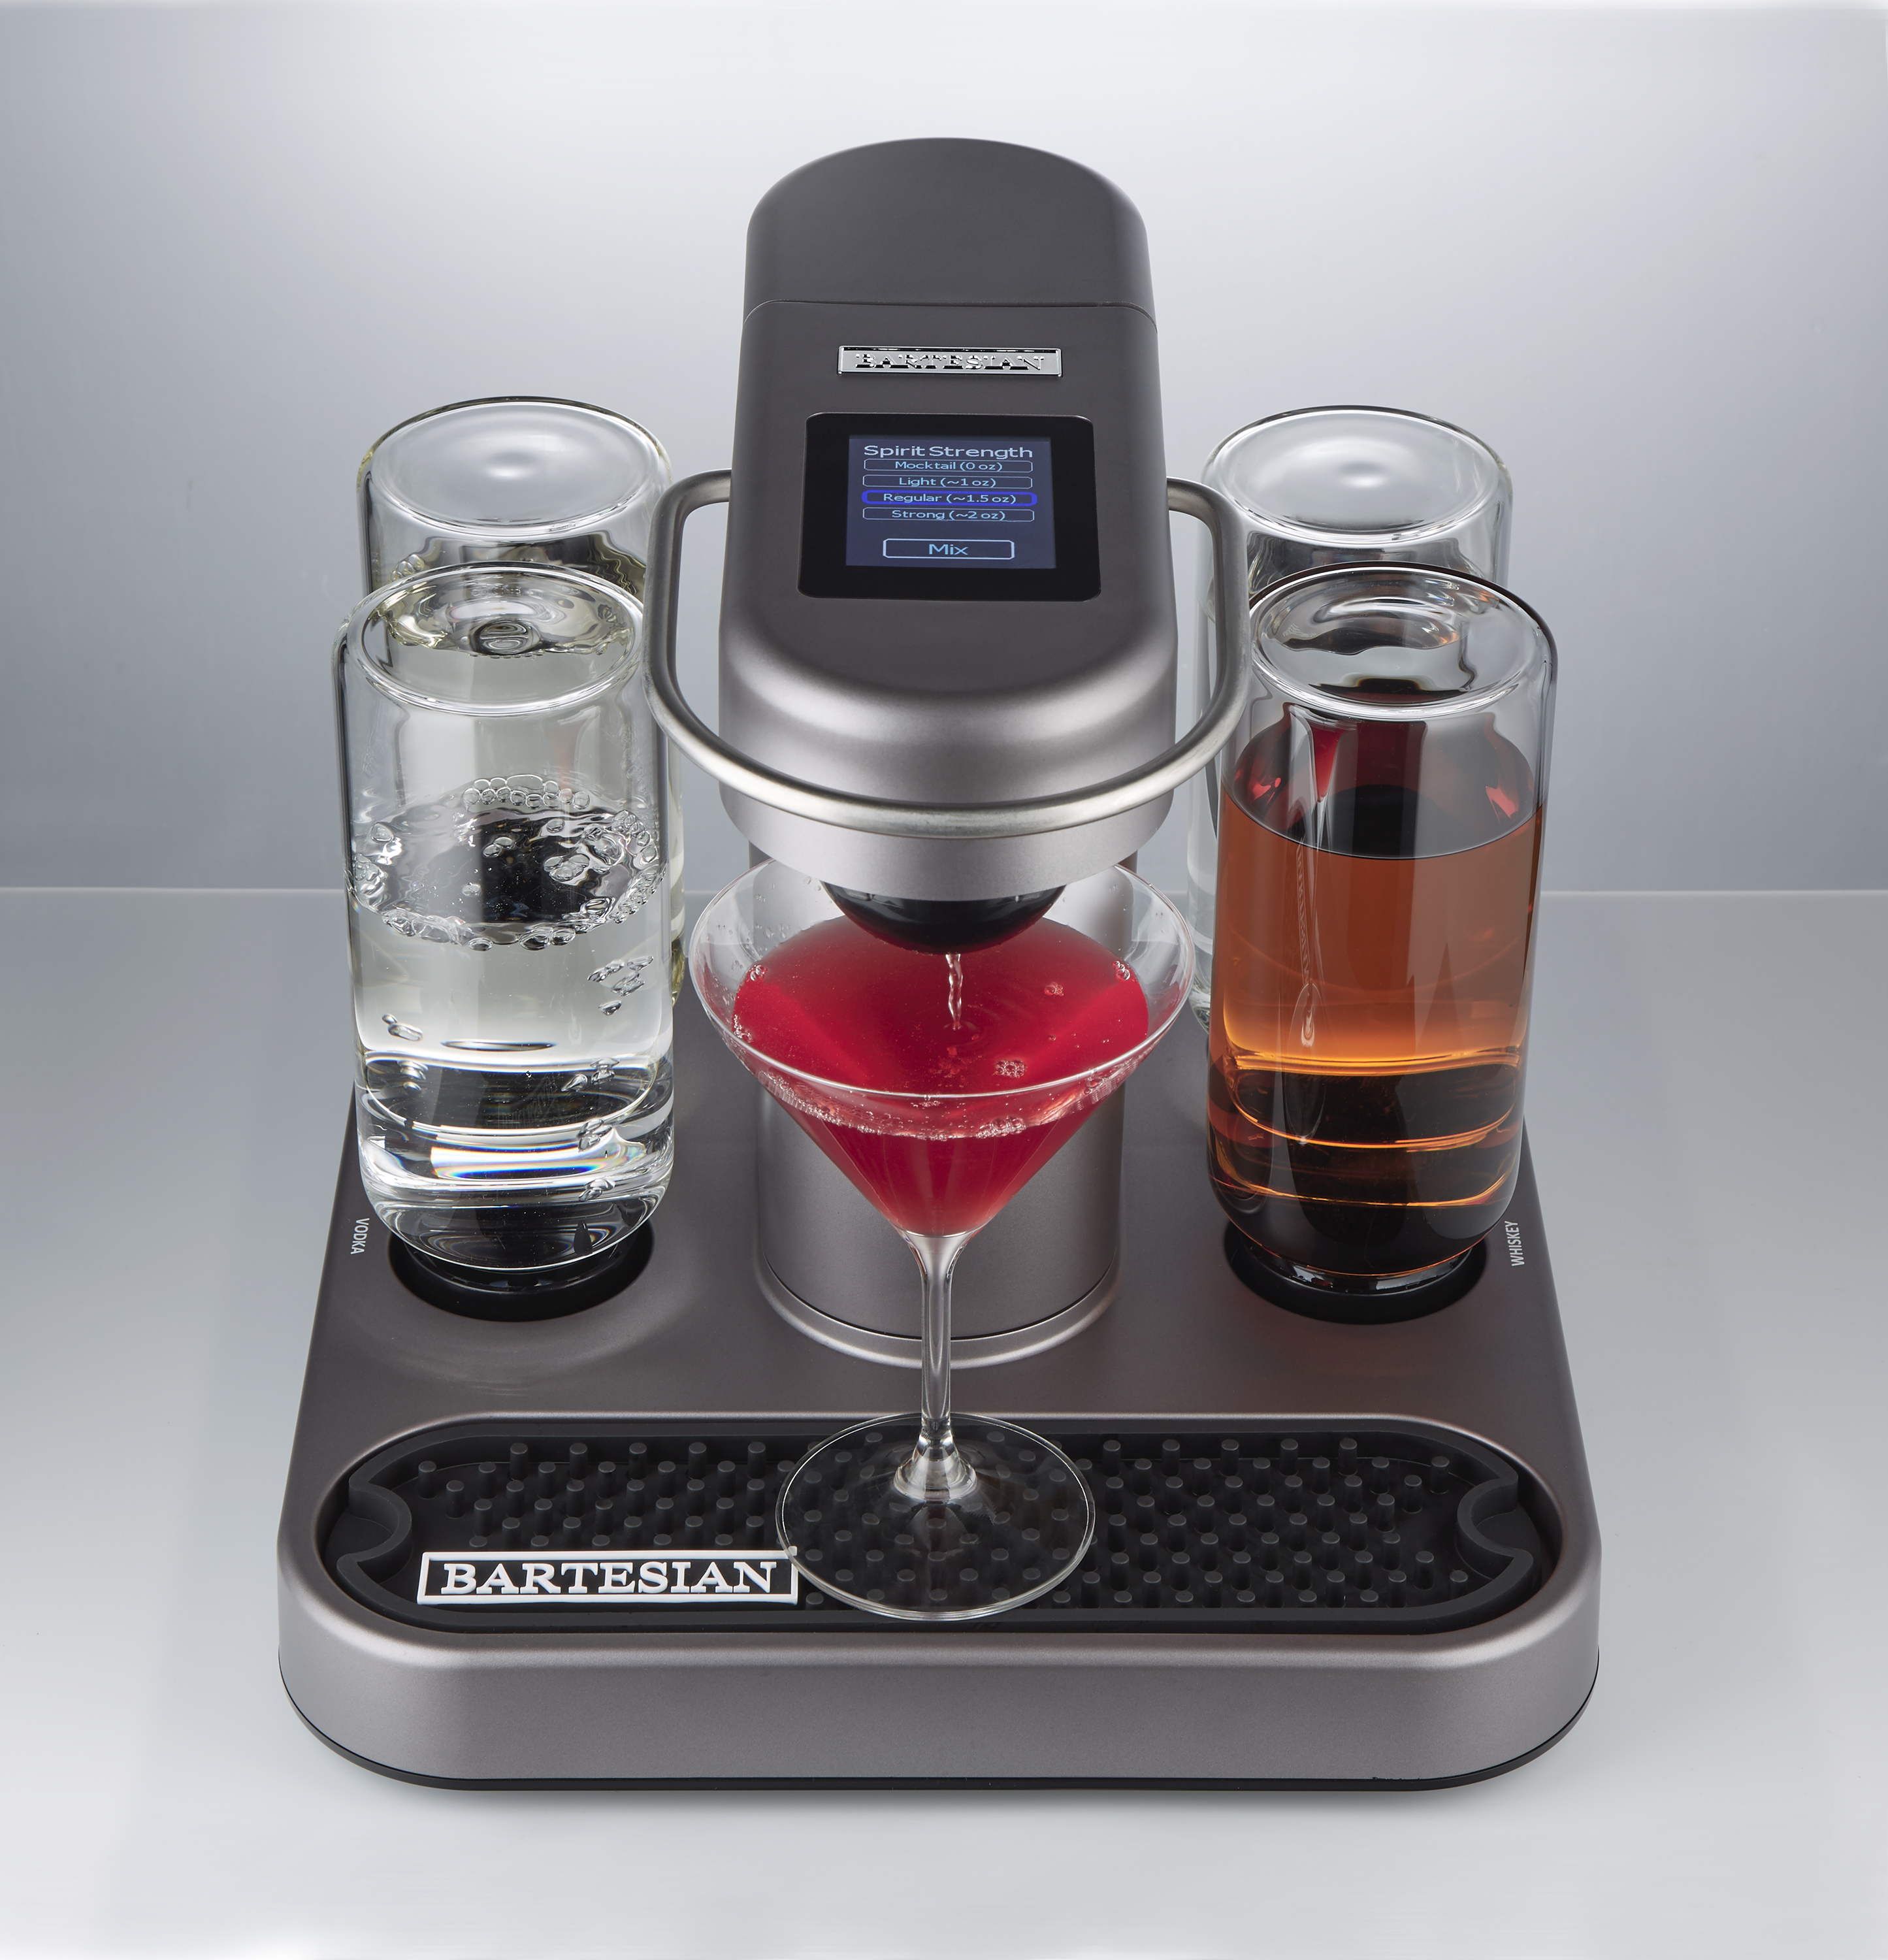 Smartphone Controlled Drink Mixing Robots Bartesian vs Somabar 3693